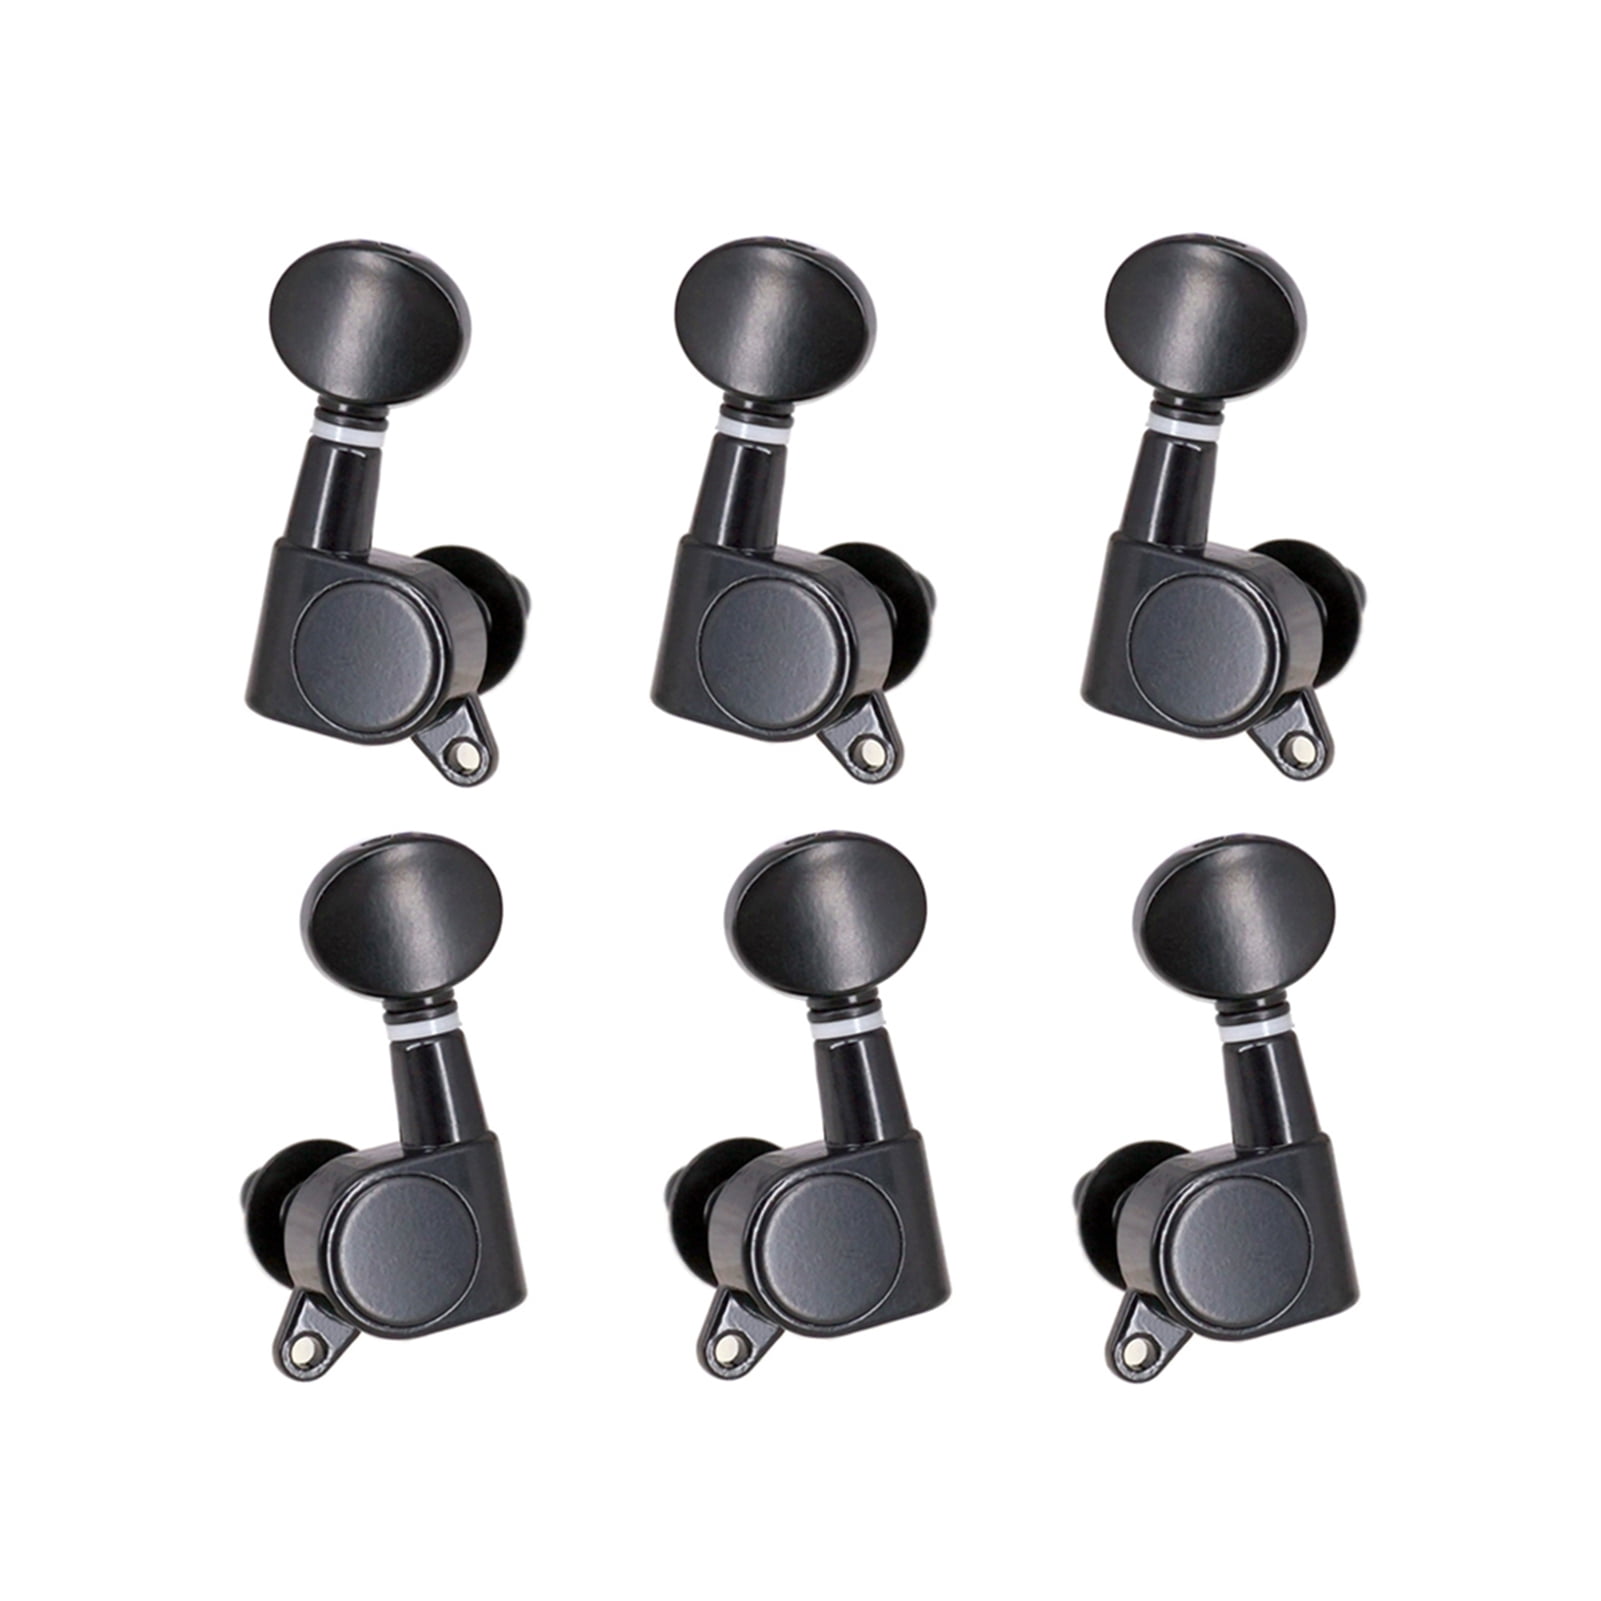 Silver Guitar Tuning Pegs 6 Pcs 6L Sealed Chrome Tuners Machine Heads Knobs for Acoustic or Electric Musician Instrument Parts Accessories Guitar String Tuning Peg Replacement